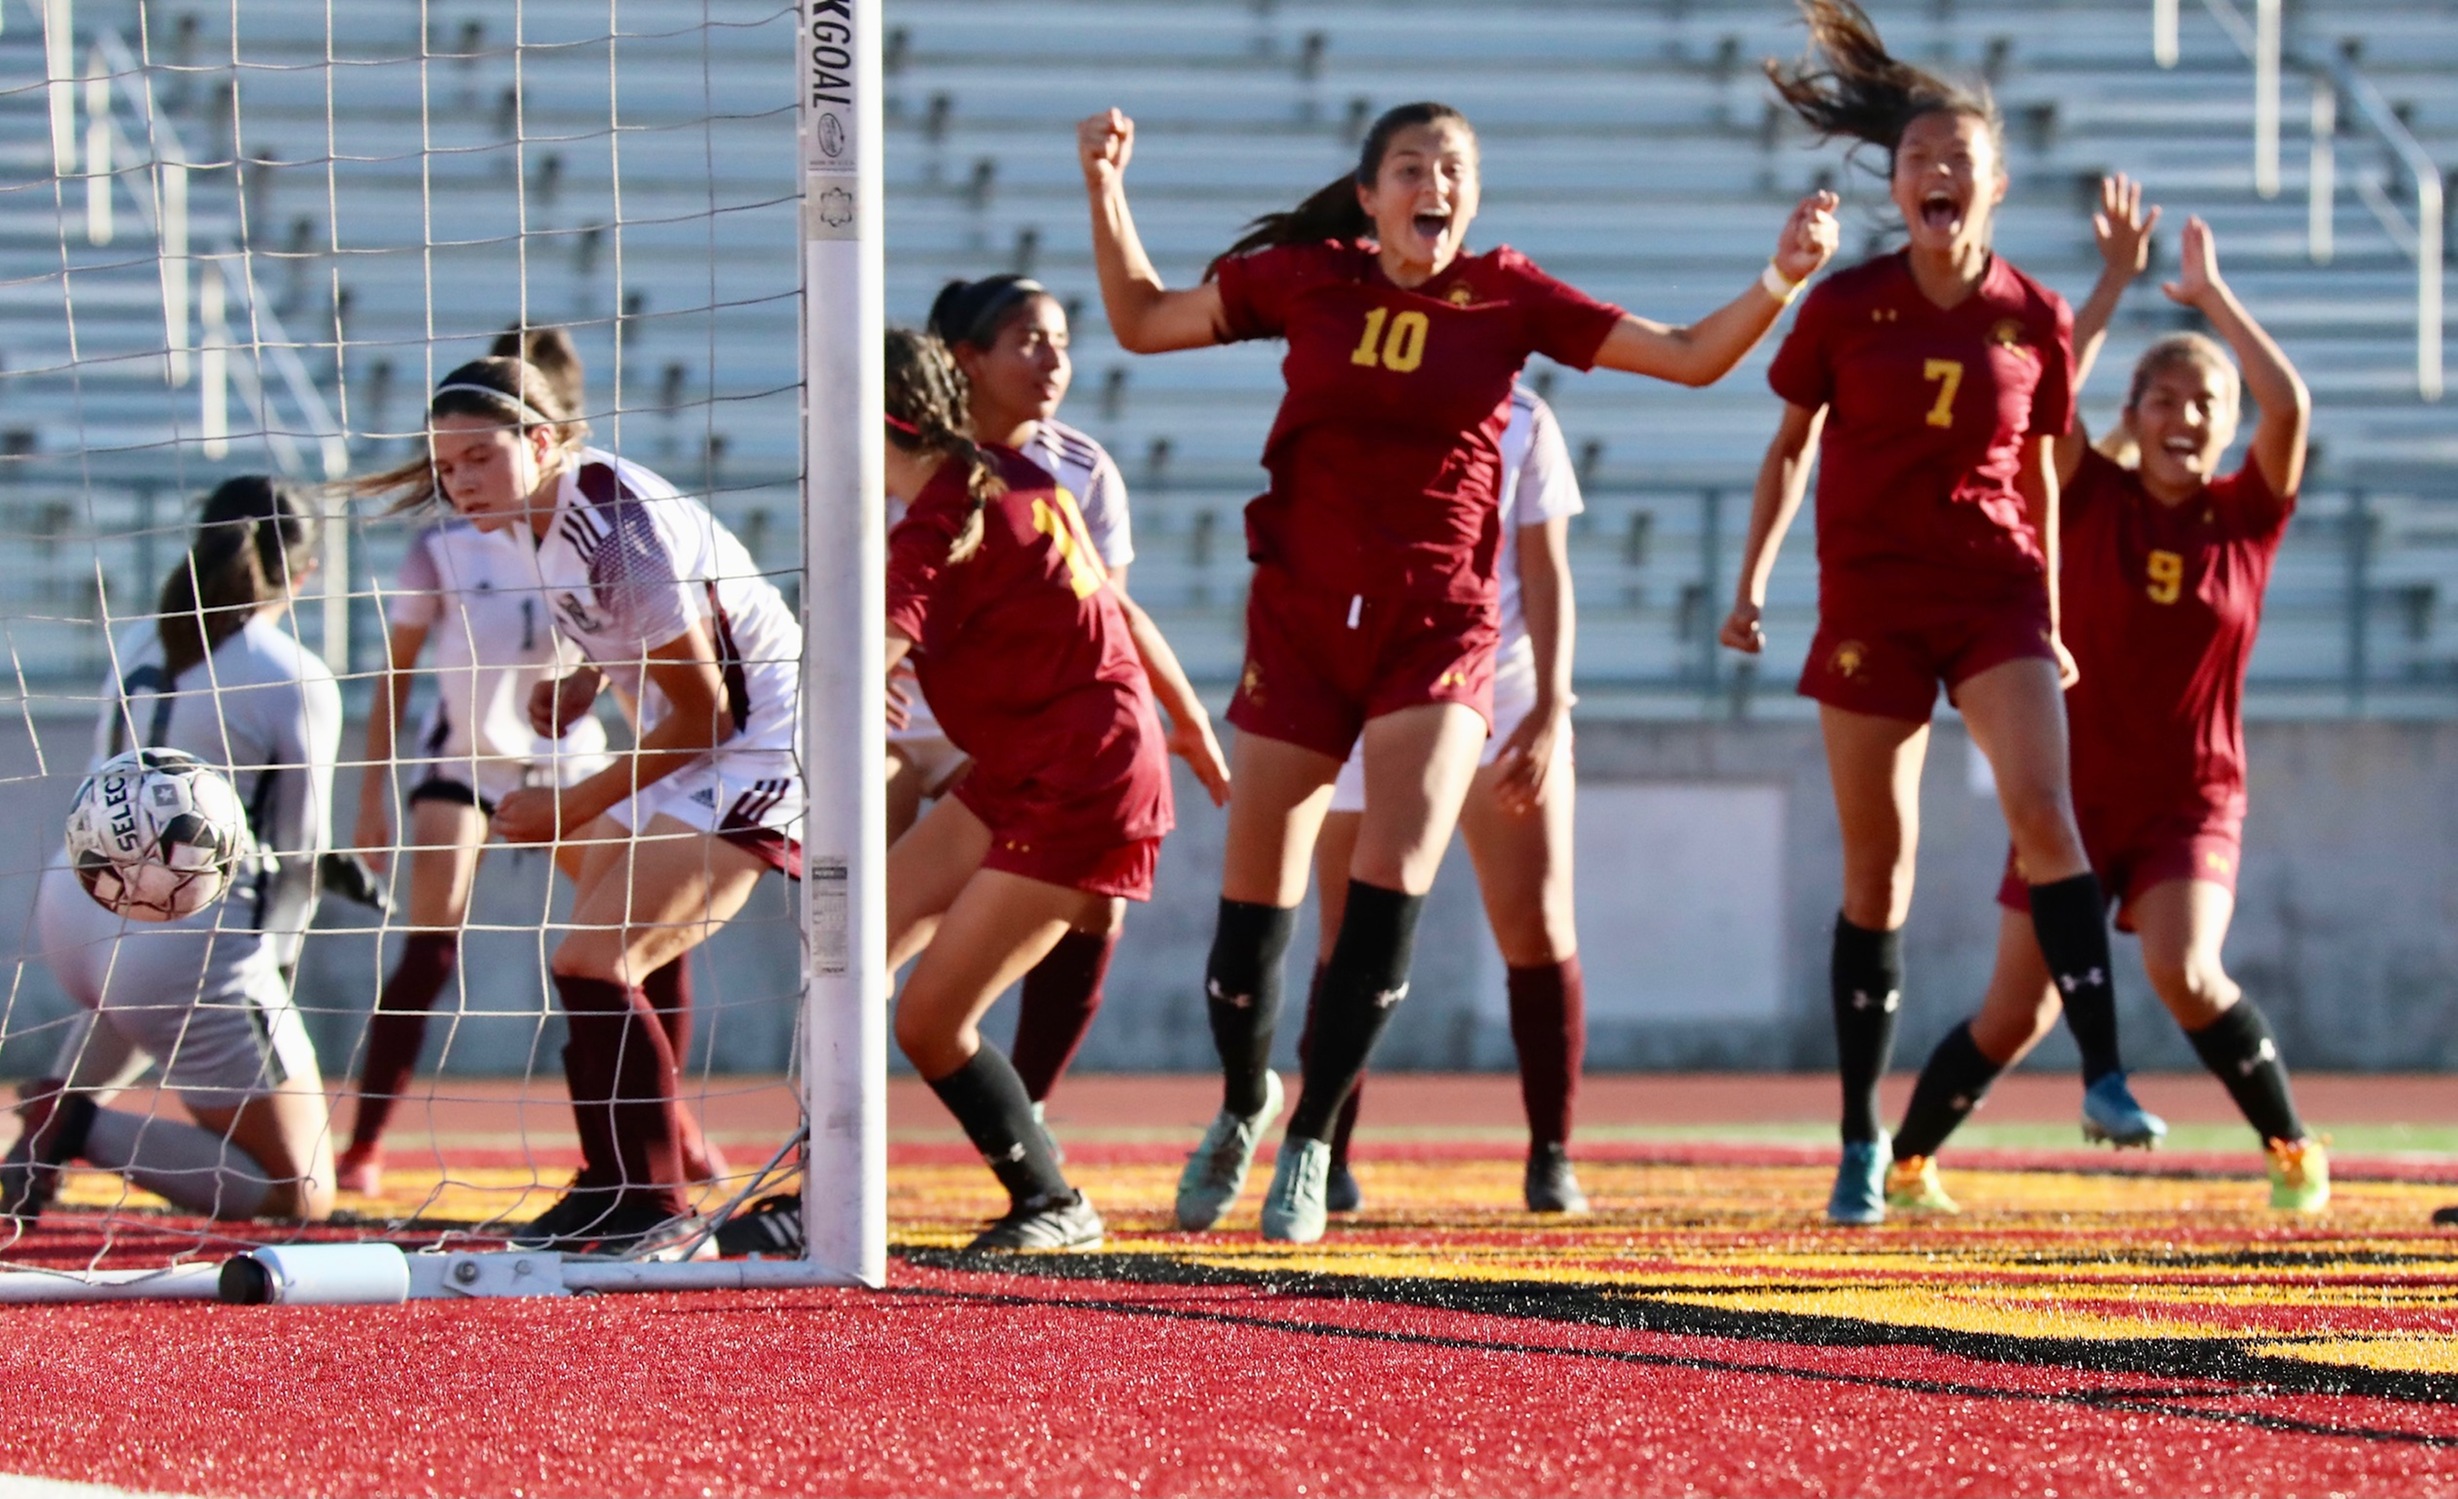 Juanita Diaz and teammates get excited following her game-tying goal in PCC's 2-1 win over Norco on Tuesday at Robinson Stadium (photo by Michael Watkins).